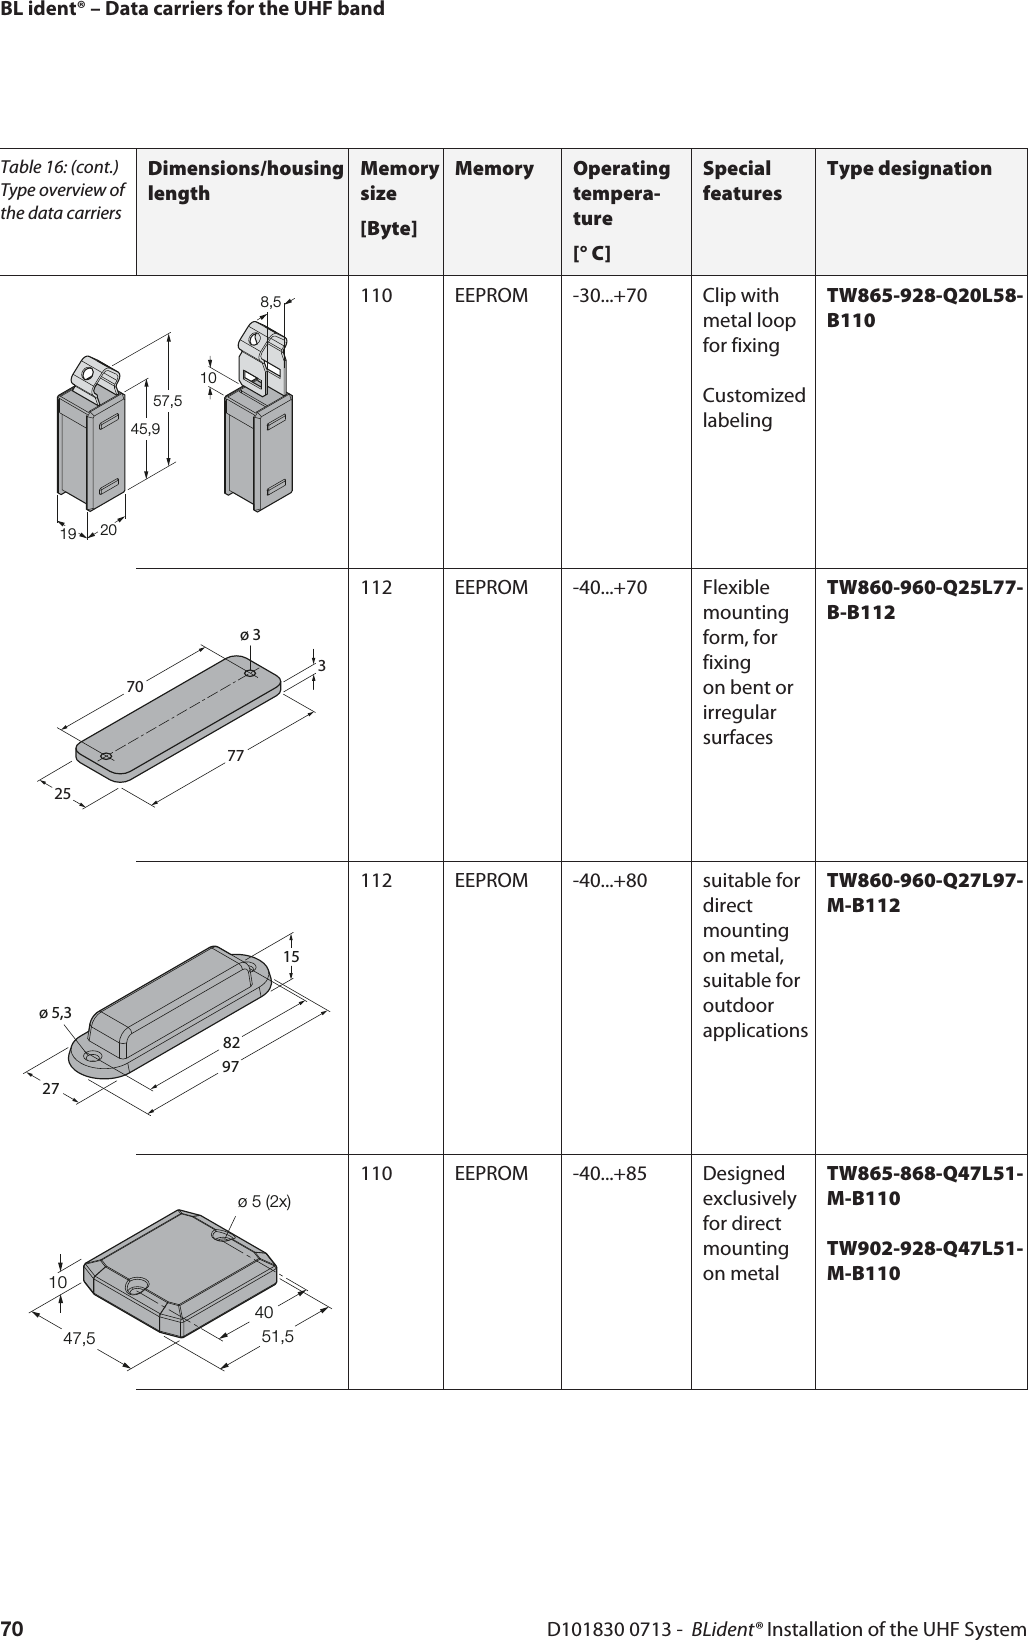 45,957,519 20108,5BL ident® – Data carriers for the UHF bandD101830 0713 -  BLident® Installation of the UHF System70110 EEPROM -30...+70 Clip with metal loopfor fixingCustomizedlabelingTW865-928-Q20L58-B1102577370ø 3112 EEPROM -40...+70 Flexible mounting form, for fixingon bent or irregularsurfacesTW860-960-Q25L77-B-B11282971527ø 5,3112 EEPROM -40...+80 suitable for direct mounting on metal,suitable for outdoor applicationsTW860-960-Q27L97-M-B1124051,547,510ø 5 (2x)110 EEPROM -40...+85 Designed exclusively for directmounting on metalTW865-868-Q47L51-M-B110TW902-928-Q47L51-M-B110Table 16: (cont.) Type overview of the data carriersDimensions/housing lengthMemory size[Byte]Memory Operating tempera-ture[° C]Special featuresType designation